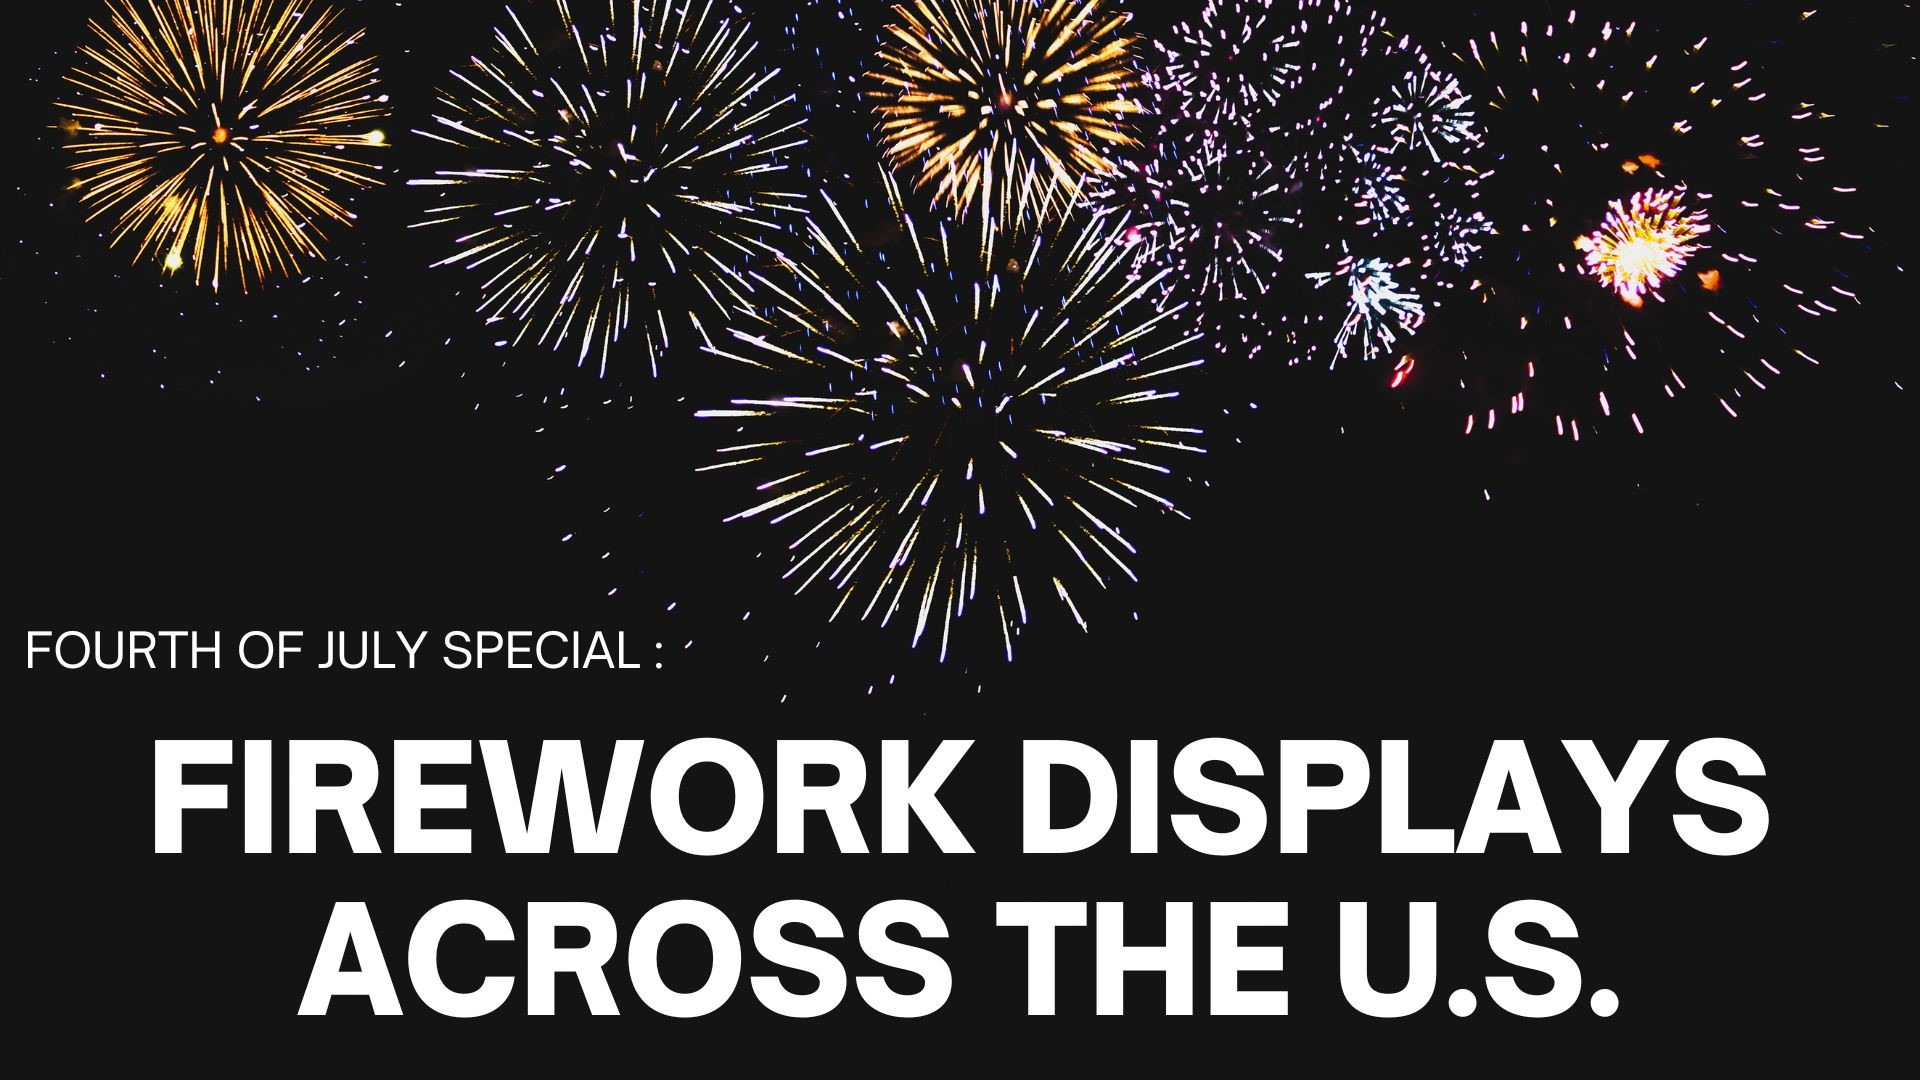 As we celebrate the Fourth of July, here is a look at firework displays from across the U.S.